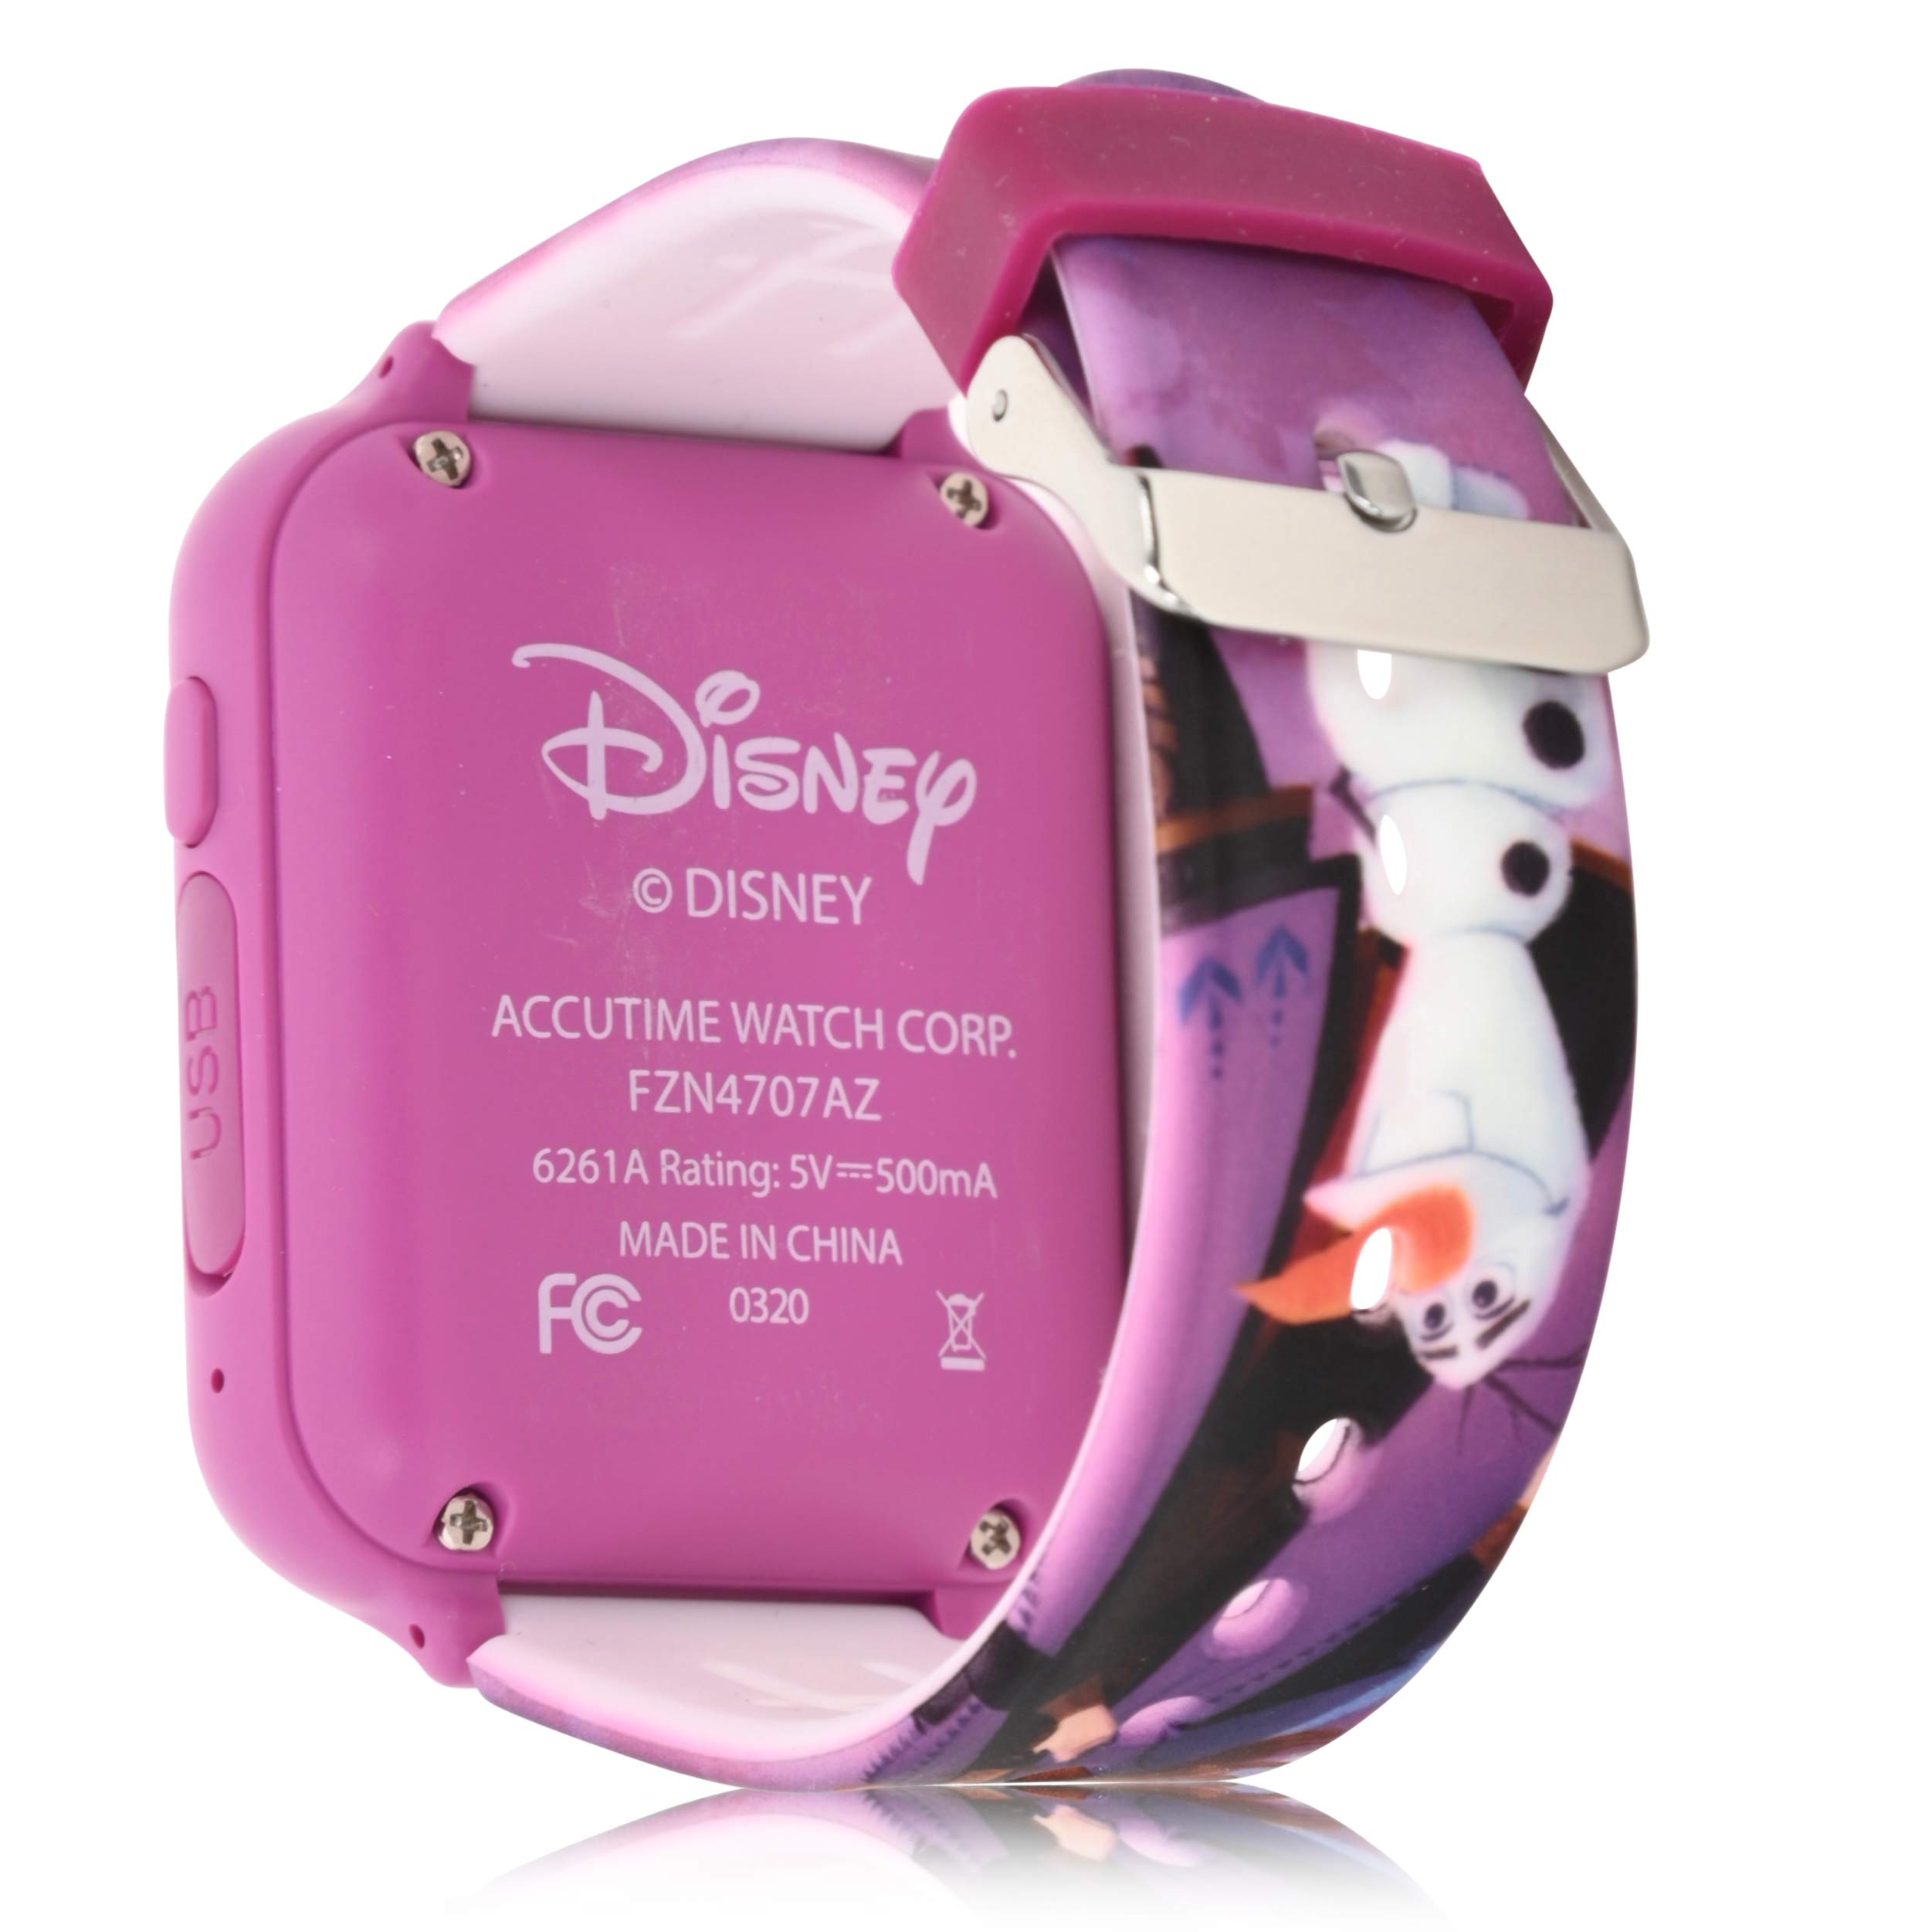 Accutime Kids Disney Frozen Smart Watch with Camera for Kids and Toddlers - Interactive Smartwatch for Boys & Girls with Games, Voice Recorder, Calculator, Pedometer, Alarm, Stopwatch